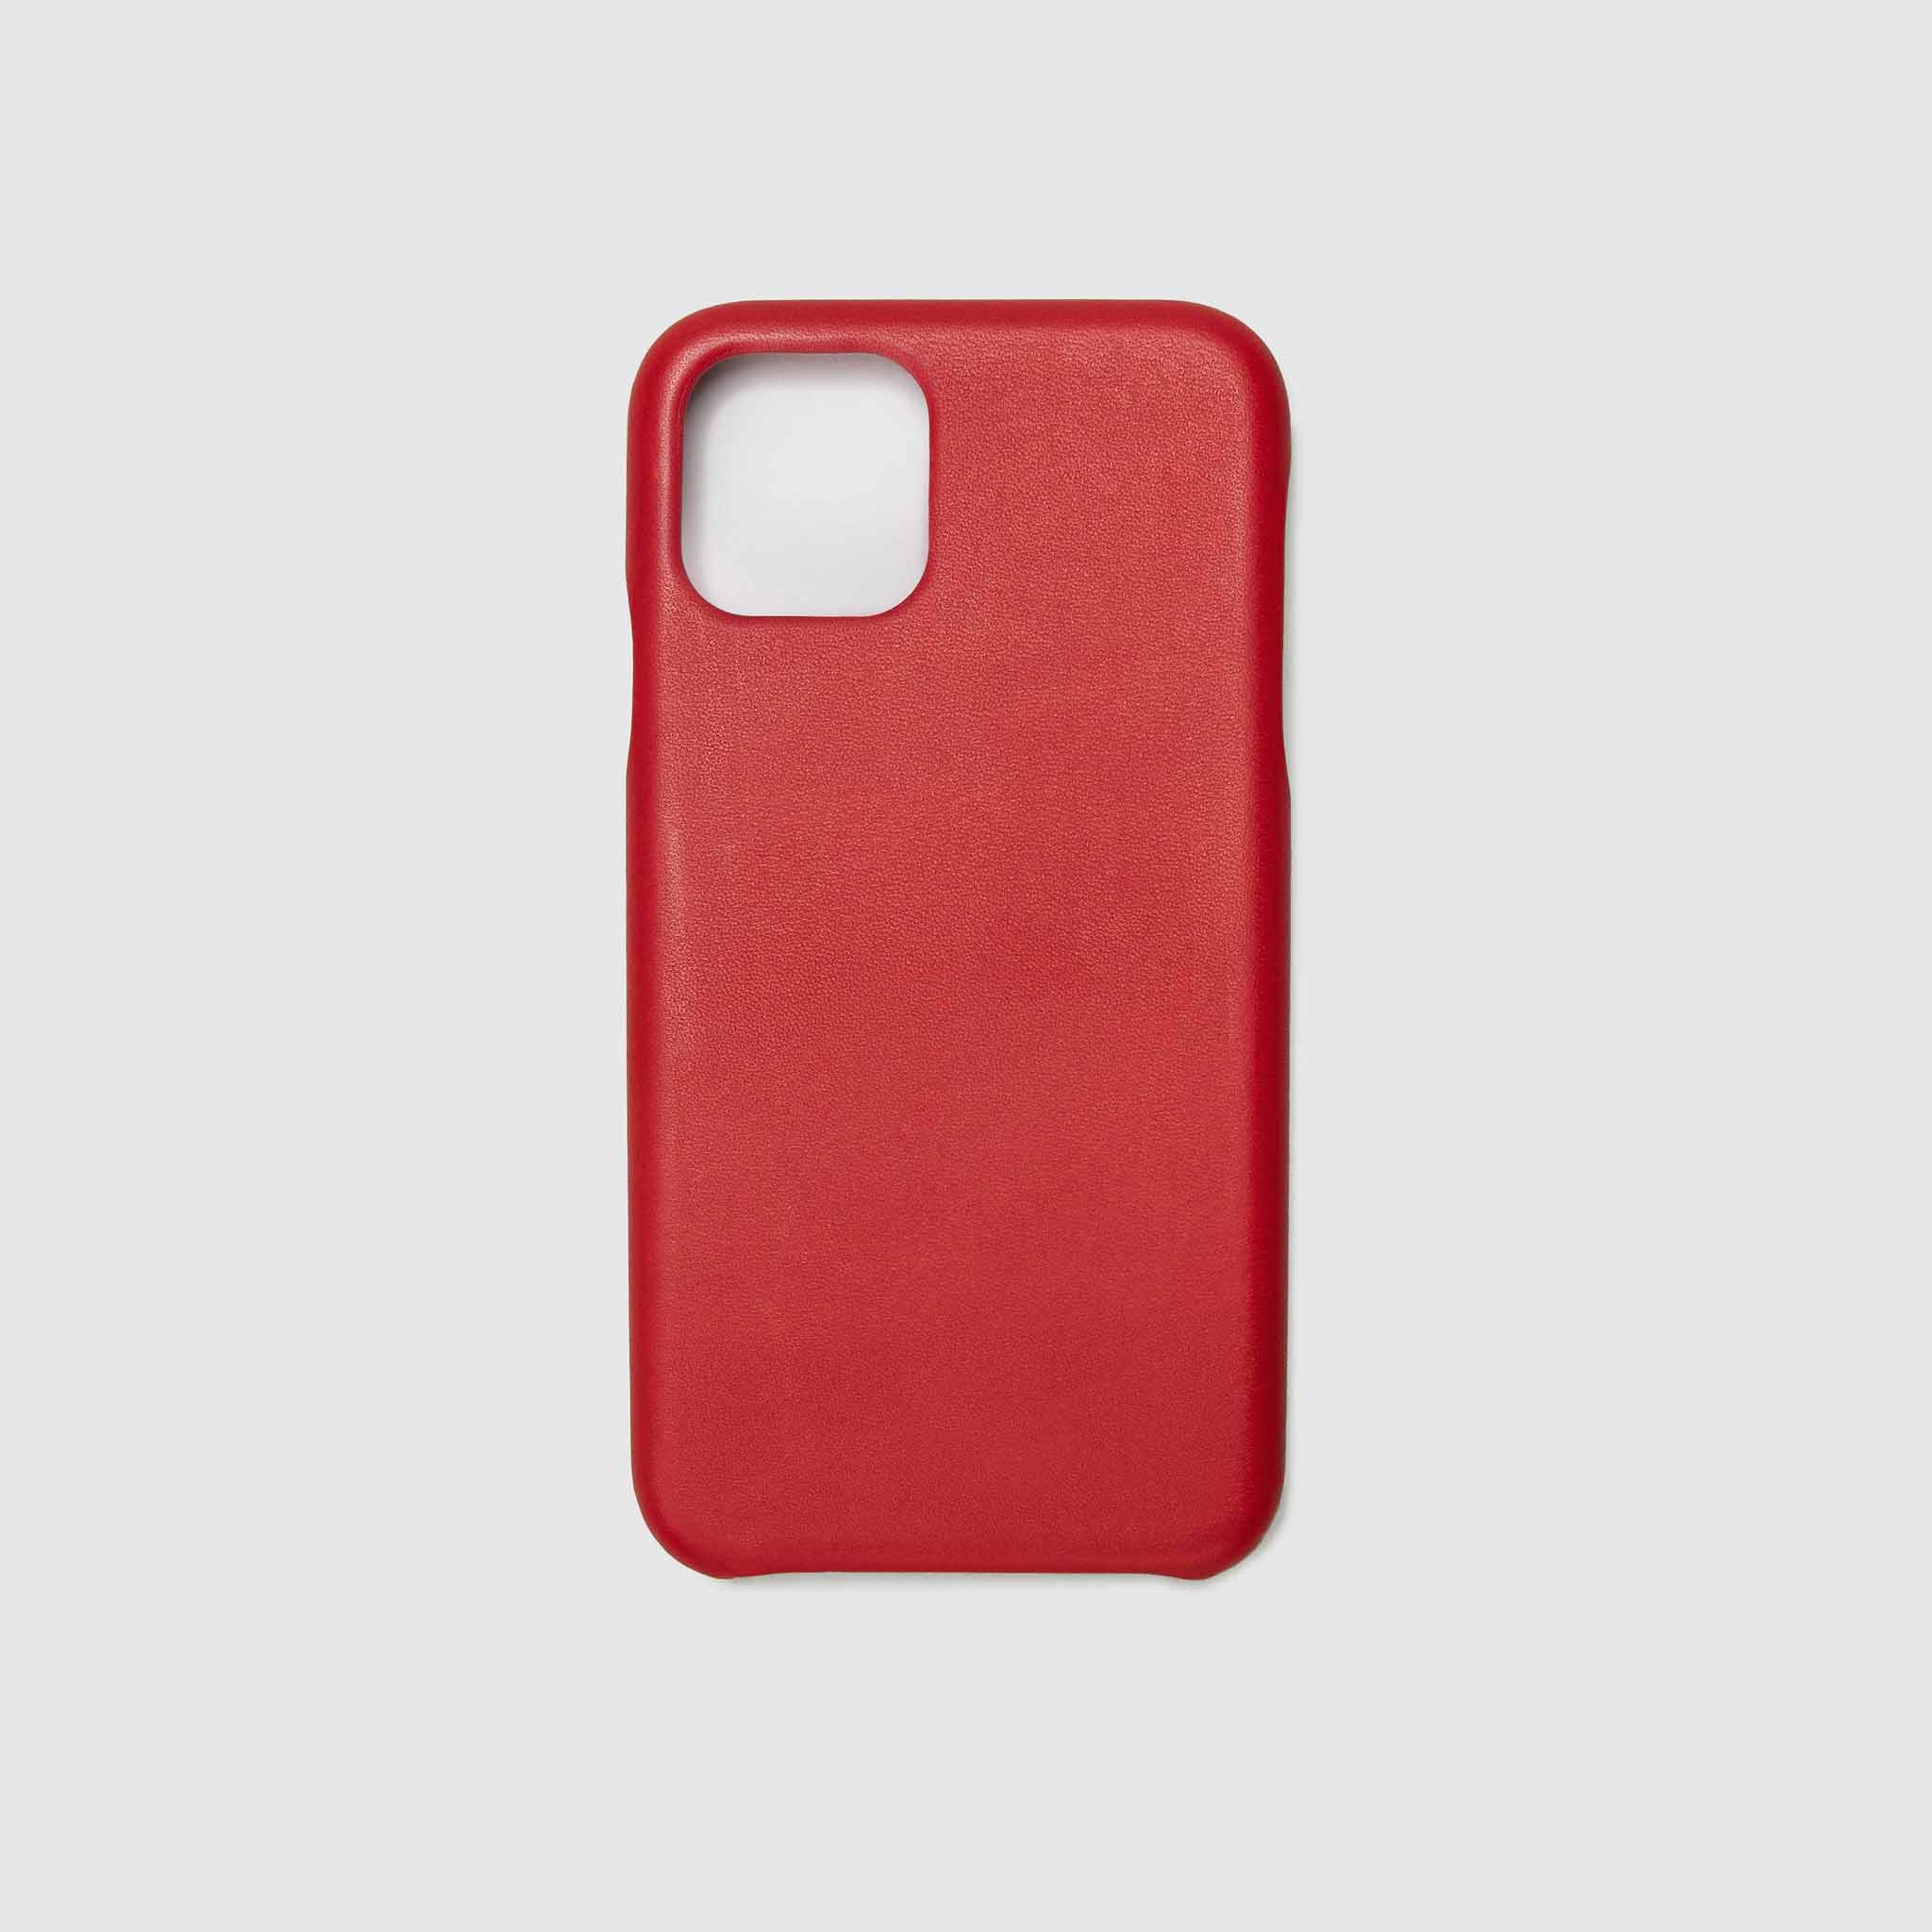 iPhone 11 Cases - Final Sale